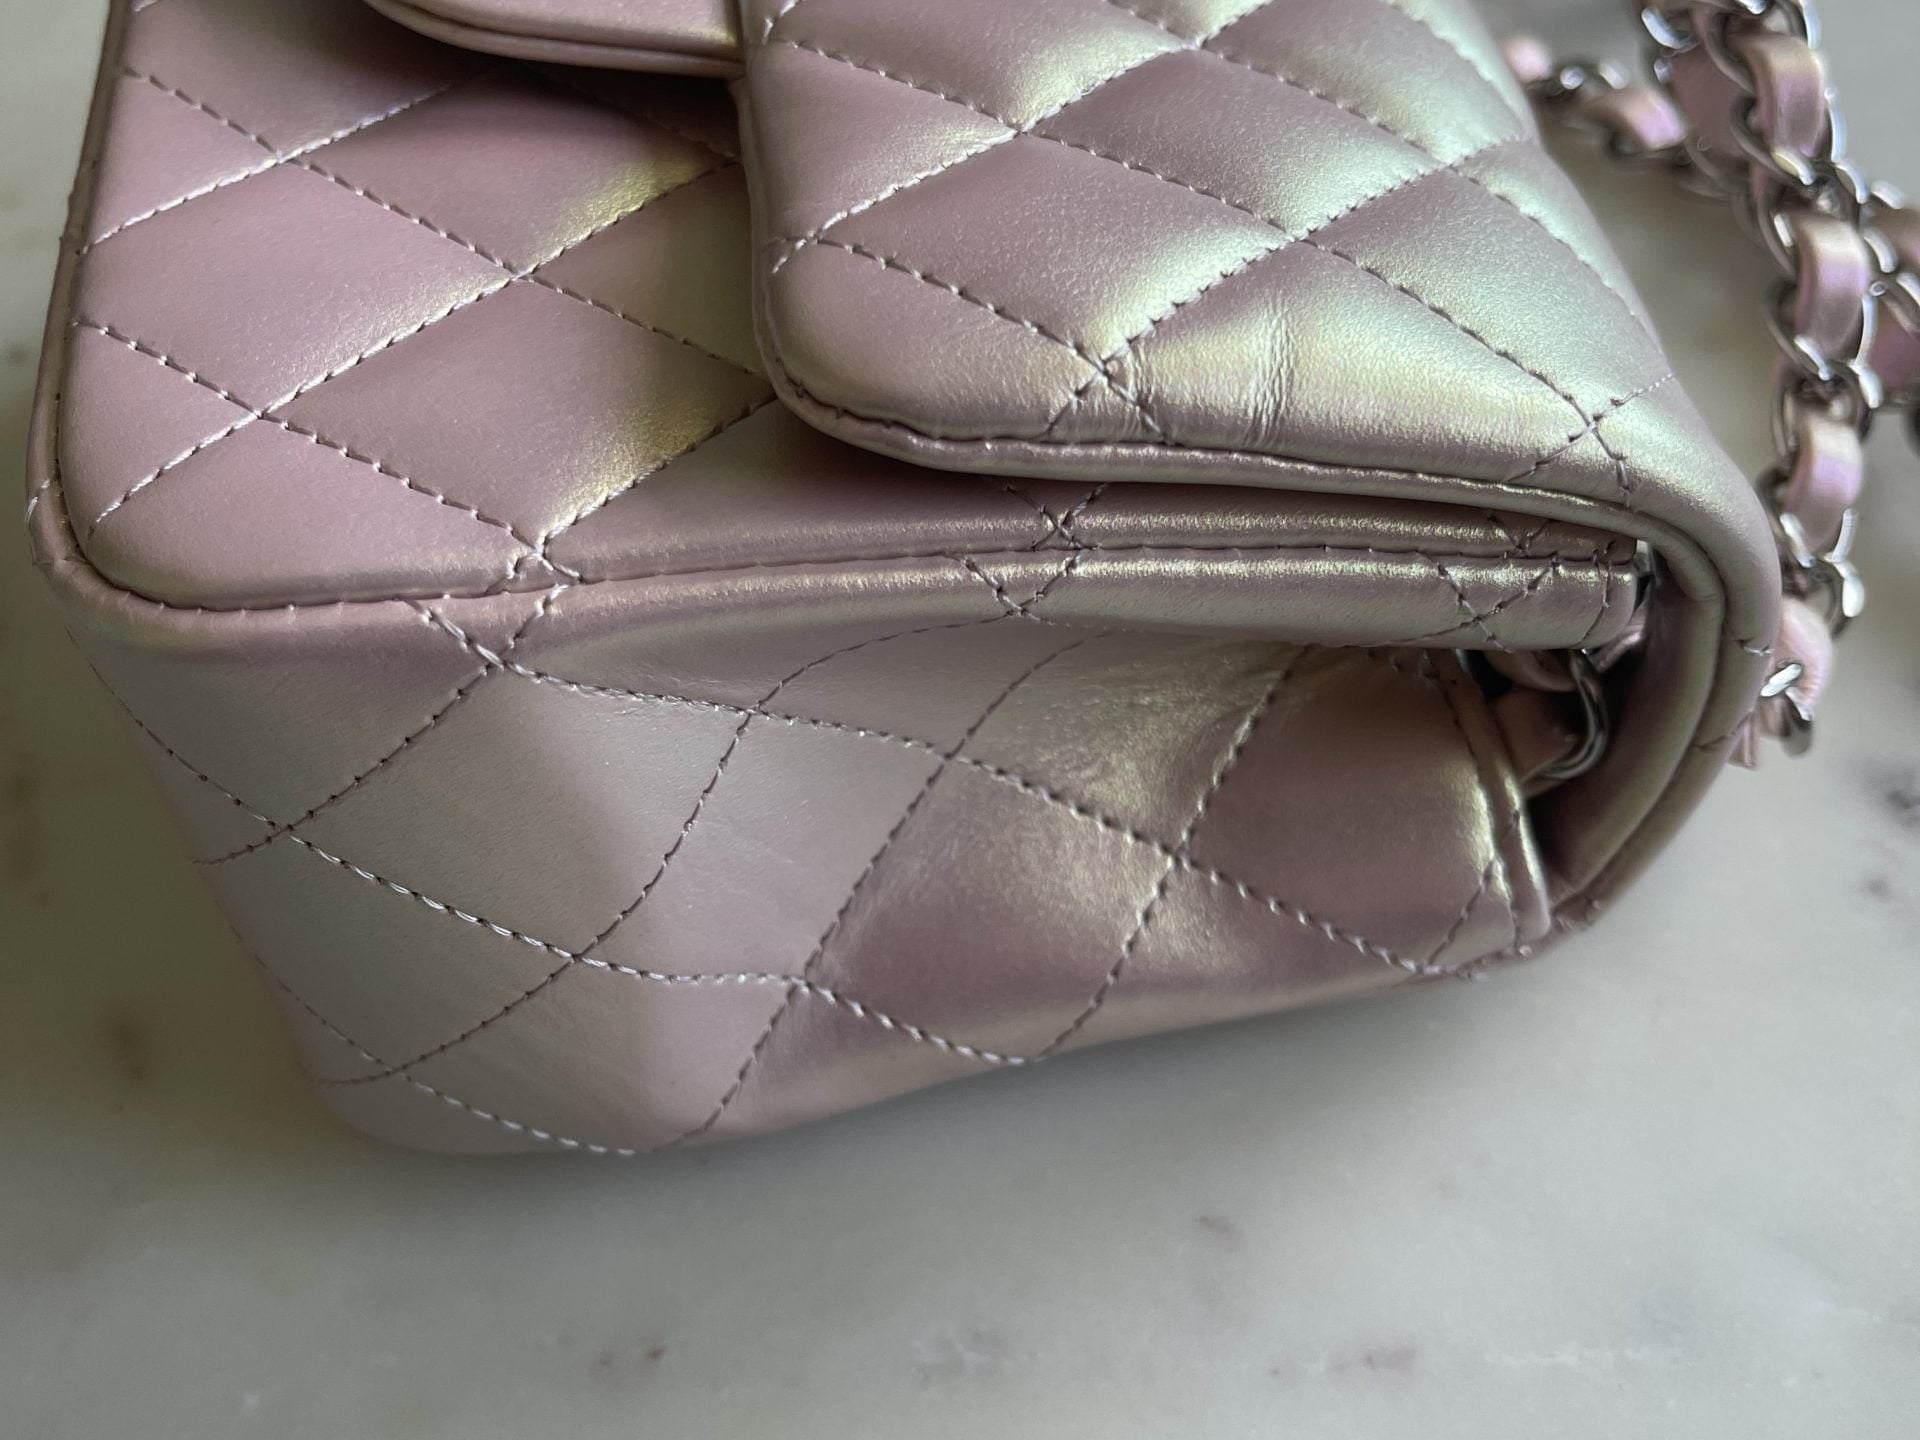 CHANEL Handbag 21K Mini Pink Iridescent Square Lambskin Quilted Classic Flap SHW - Redeluxe